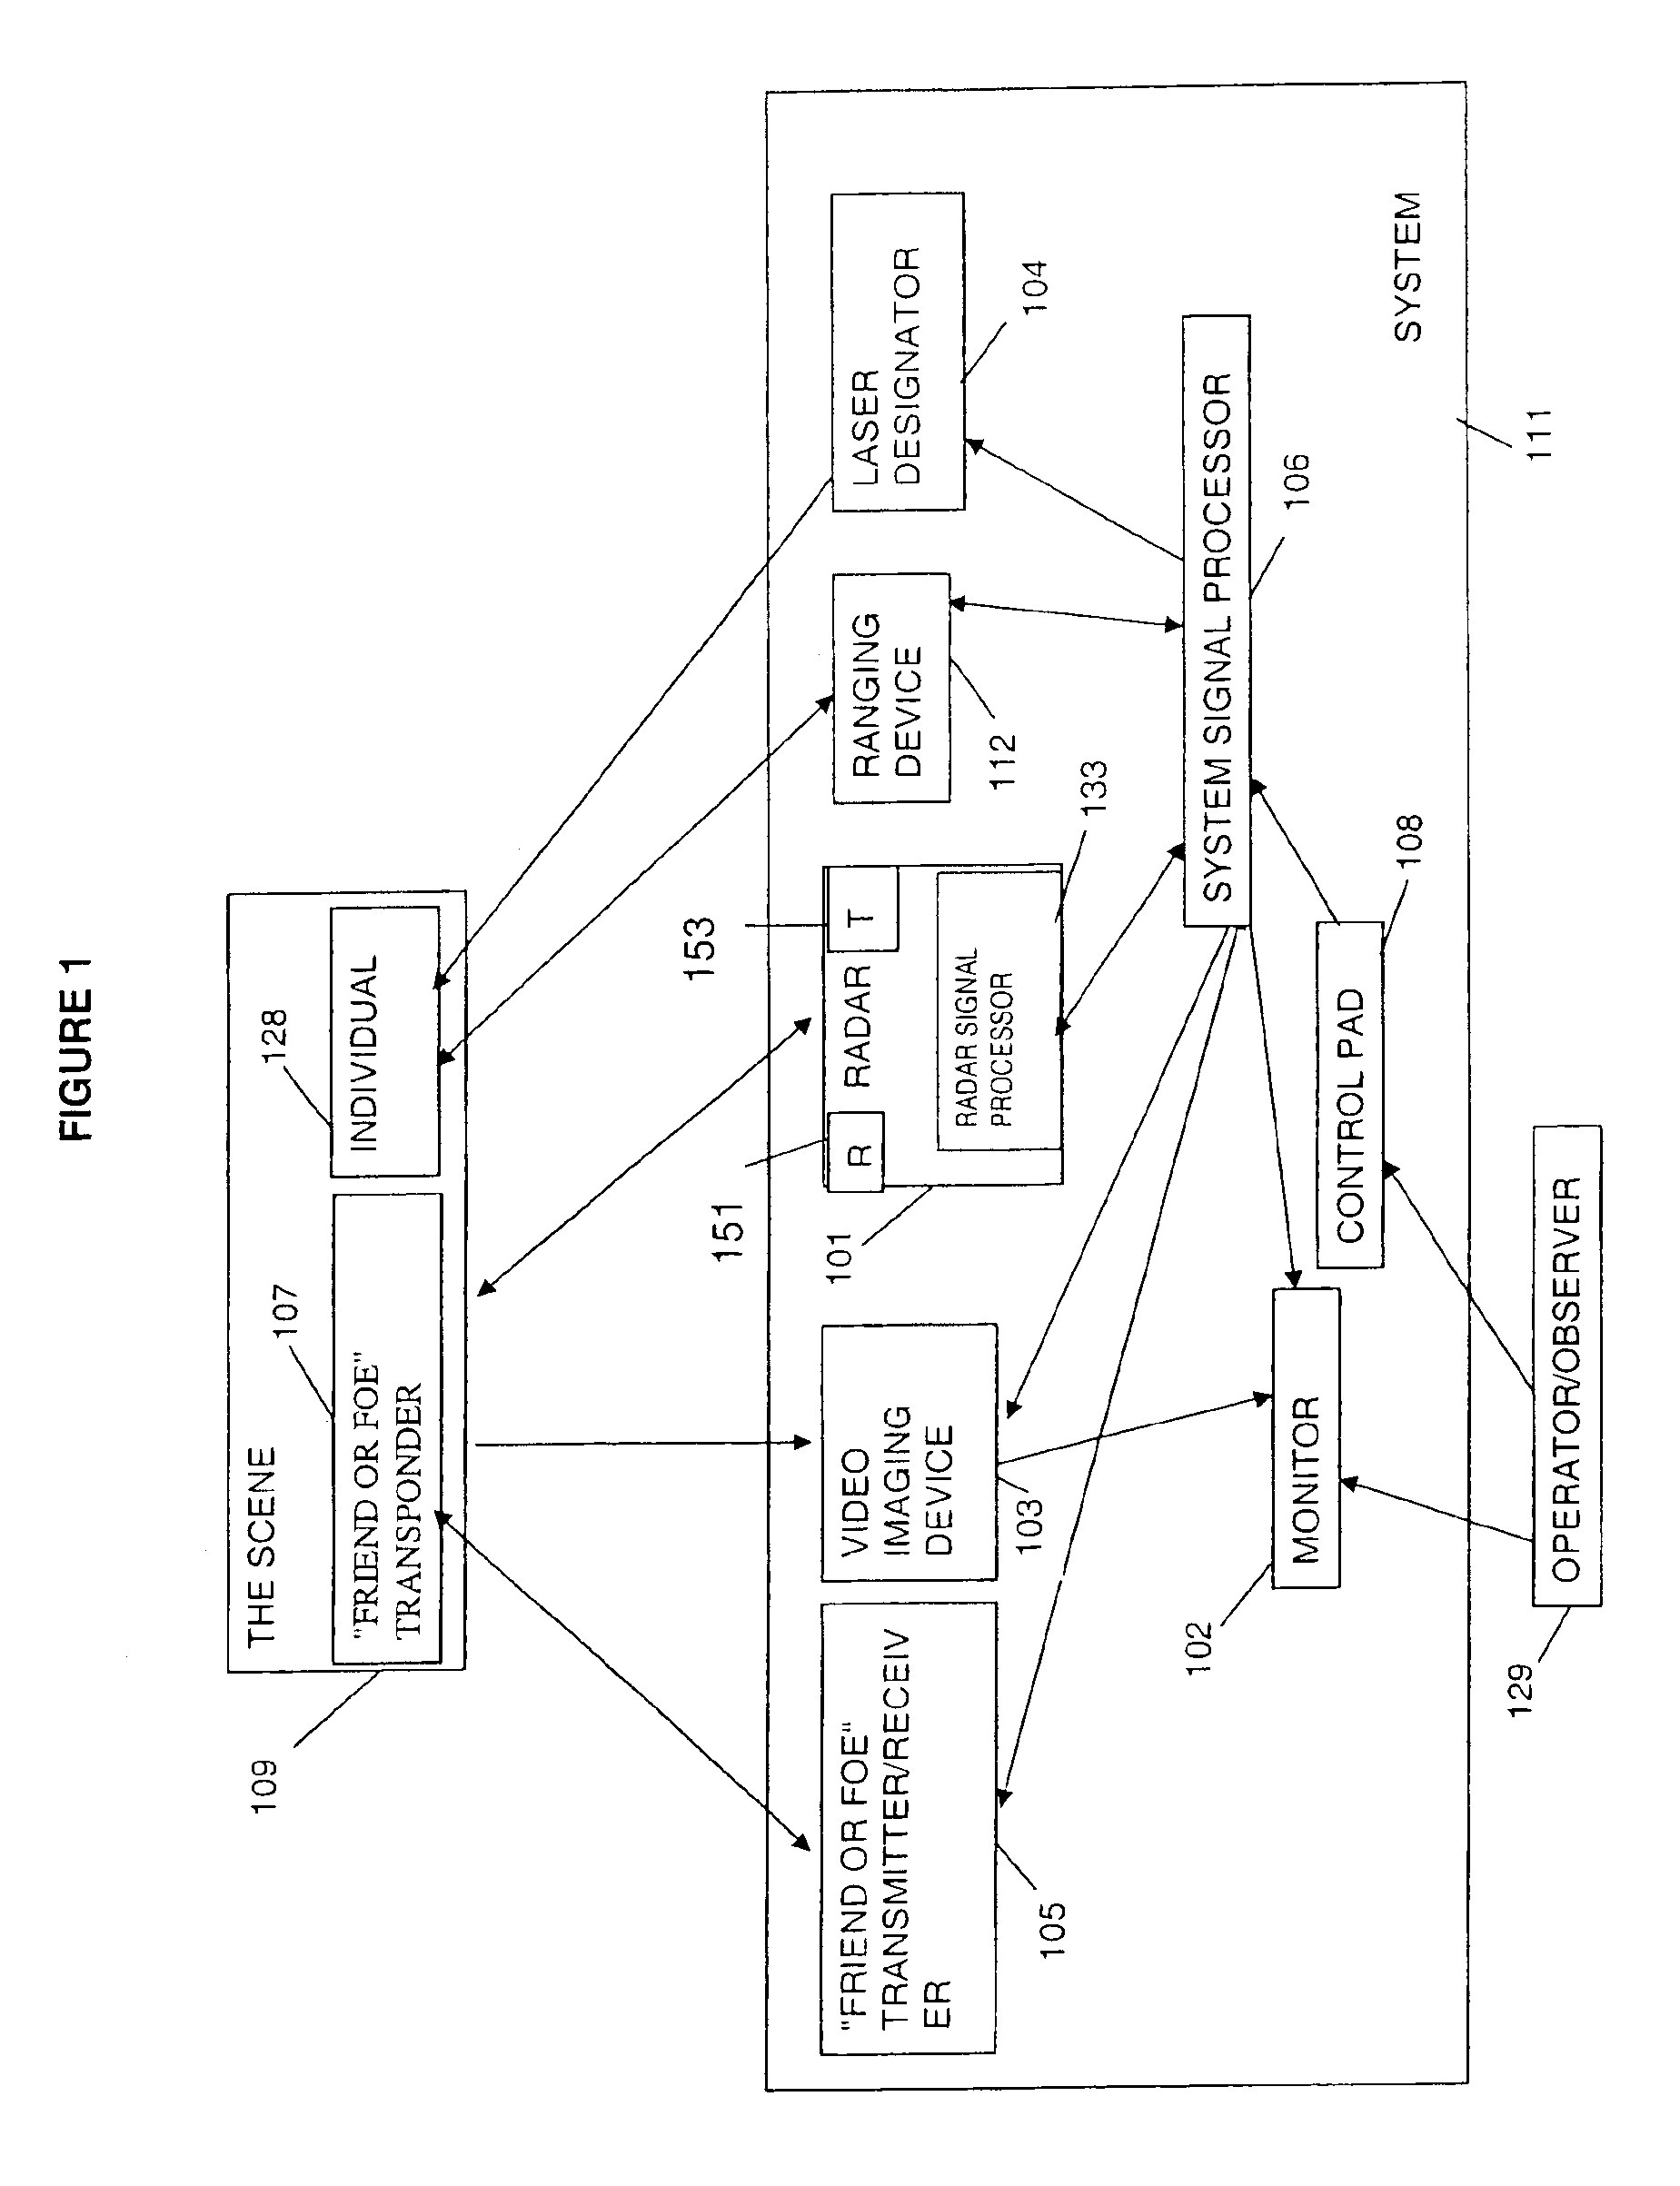 Methods and apparatus for detecting threats in different areas